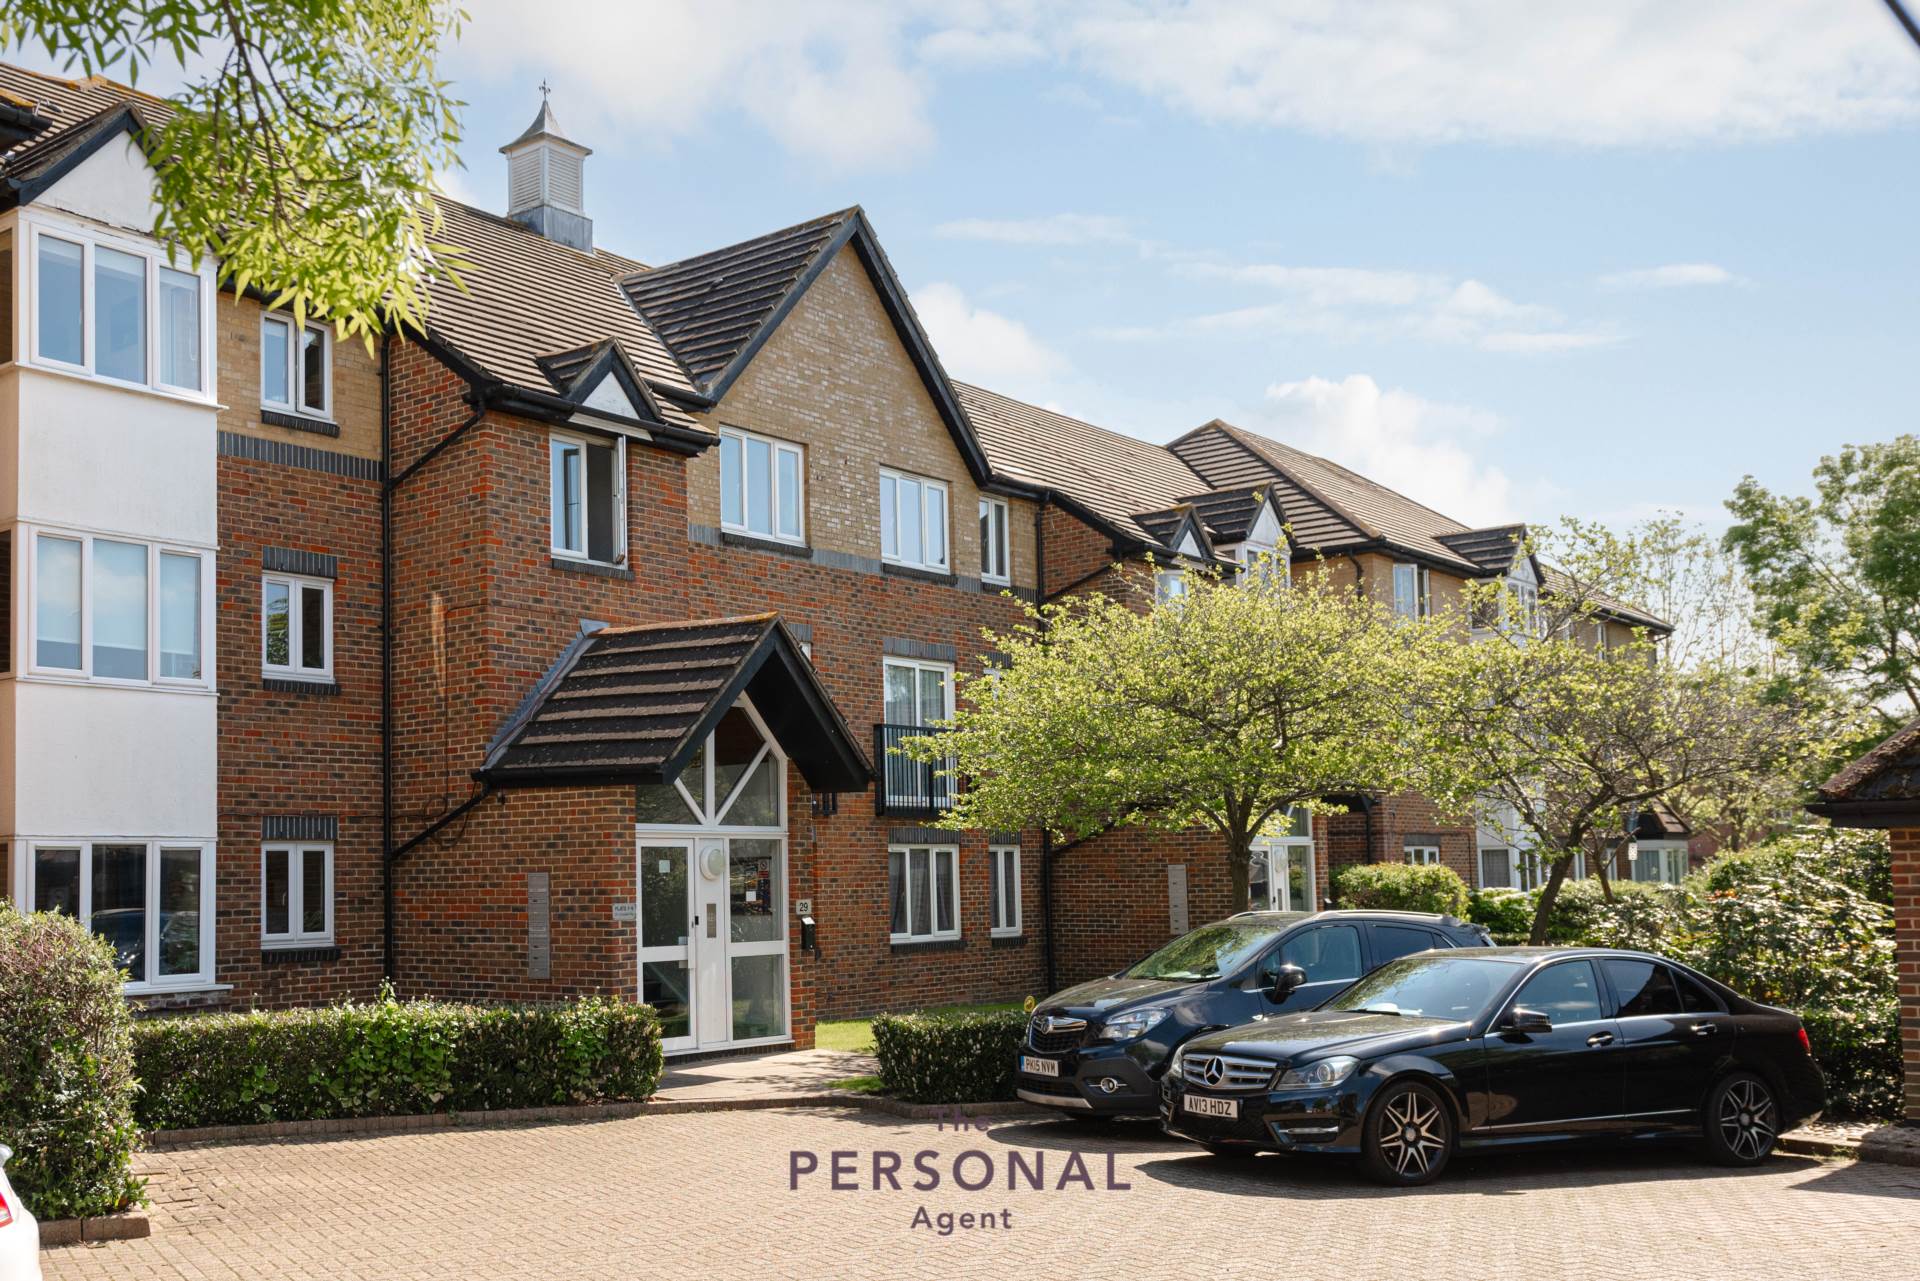 2 bed Flat for rent in Worcester Park. From The Personal Agent - Epsom